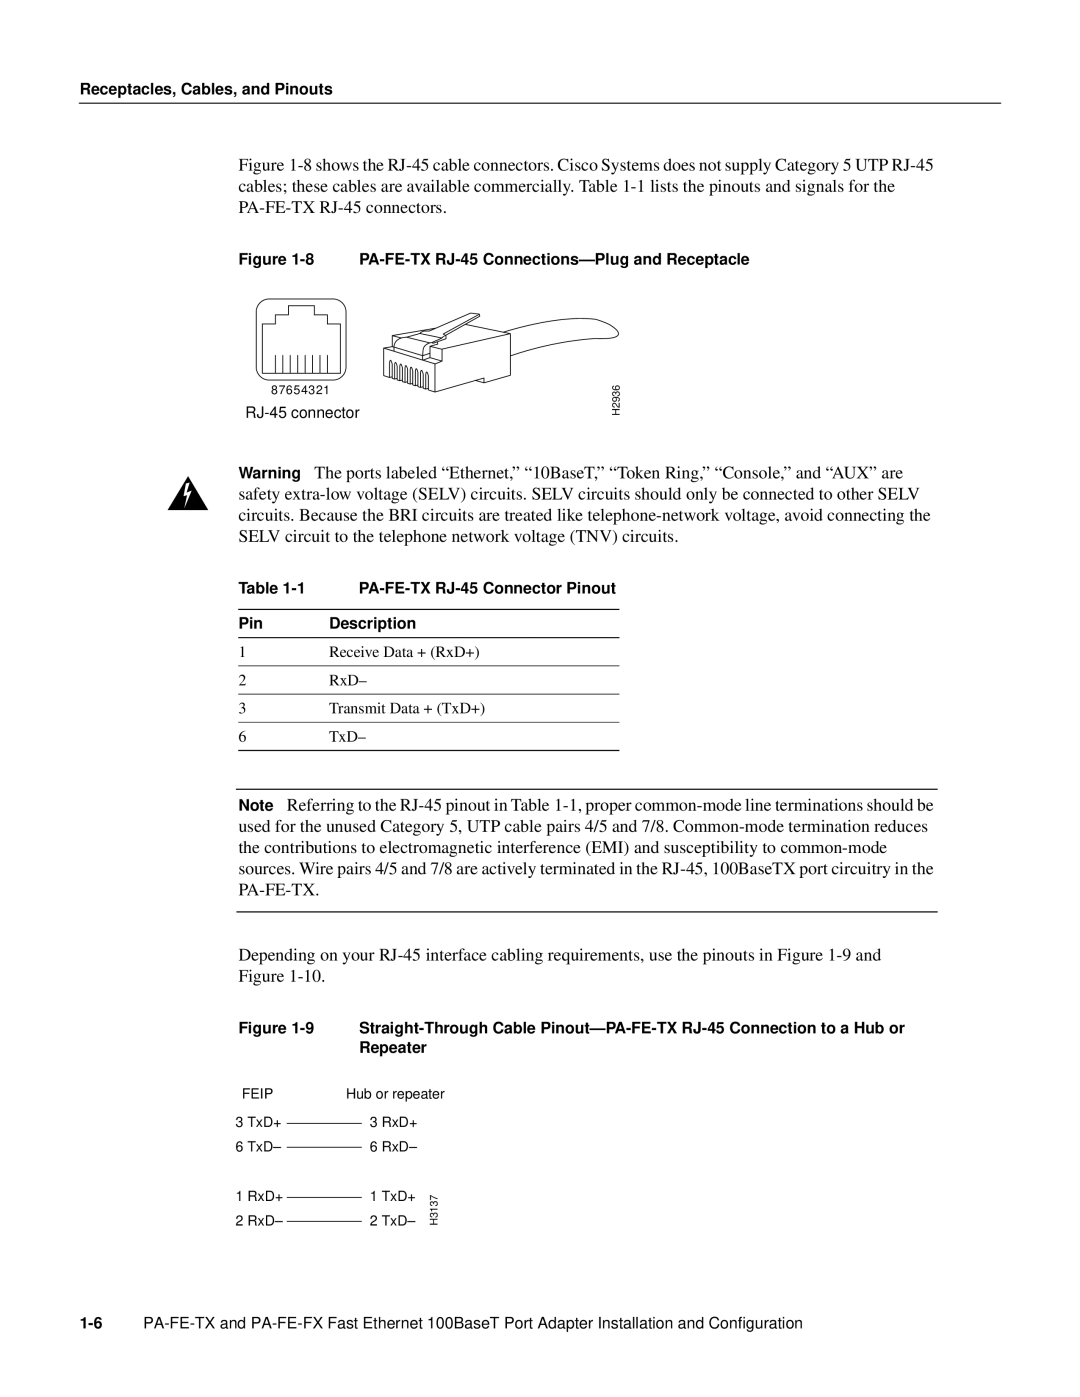 Cisco Systems PA-FE-TX, PA-FE-FX manual RJ-45 connector, Receive Data + RxD+, Transmit Data + TxD+ 